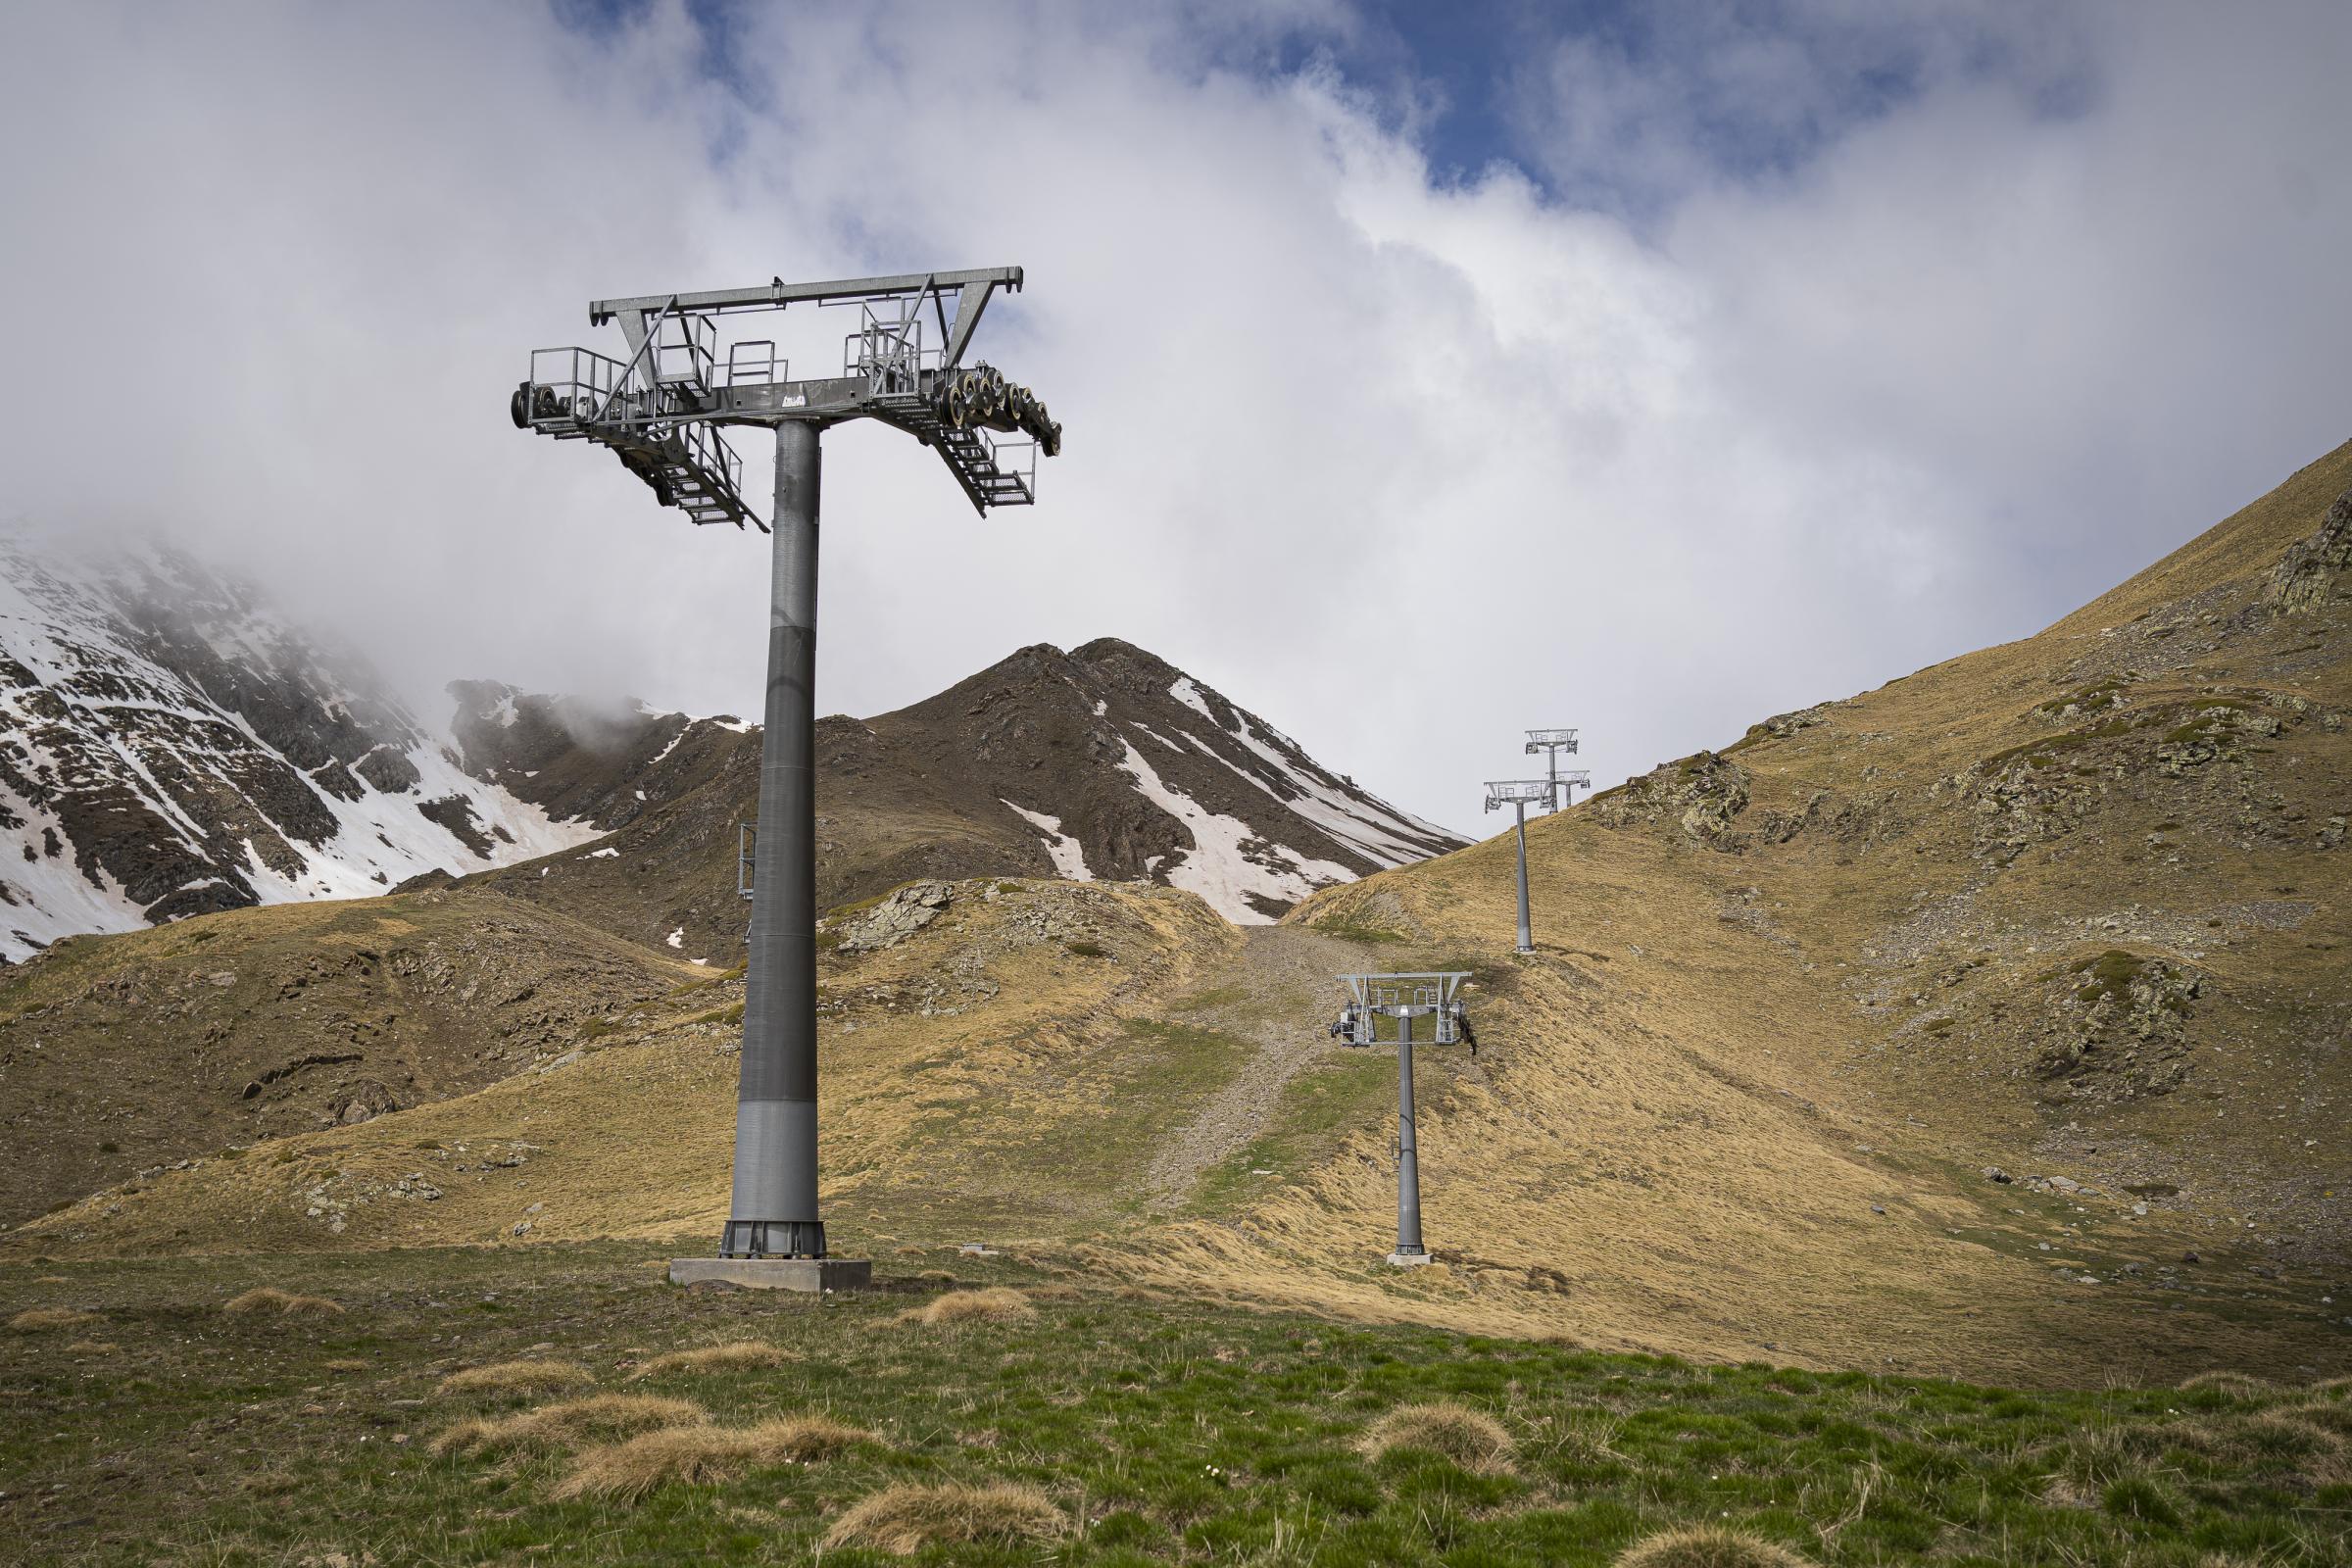  The foundations of the chairlift system at an altitude of 2 400 metres in the Barranc de Coma...